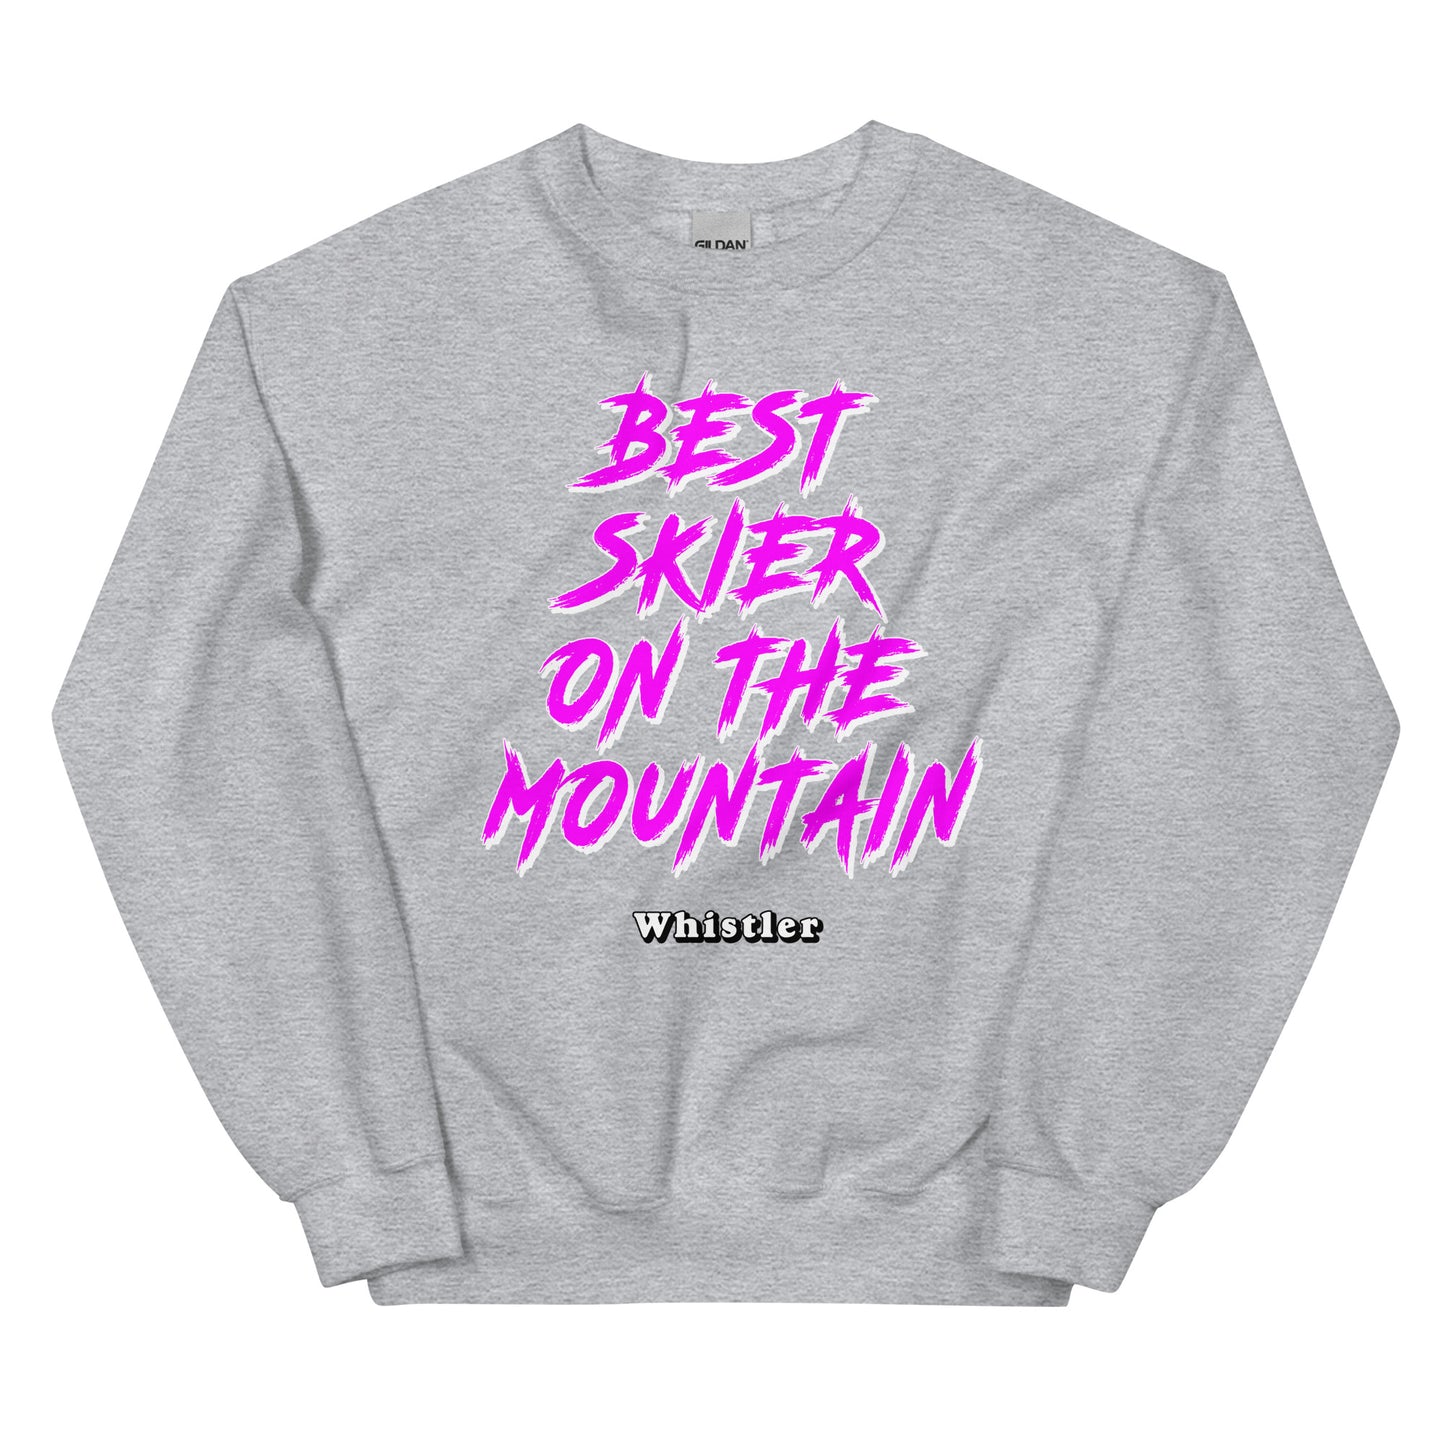 best skiier on the mountain whistler design printed on a crewneck sweatshirt by Whistler Shirts